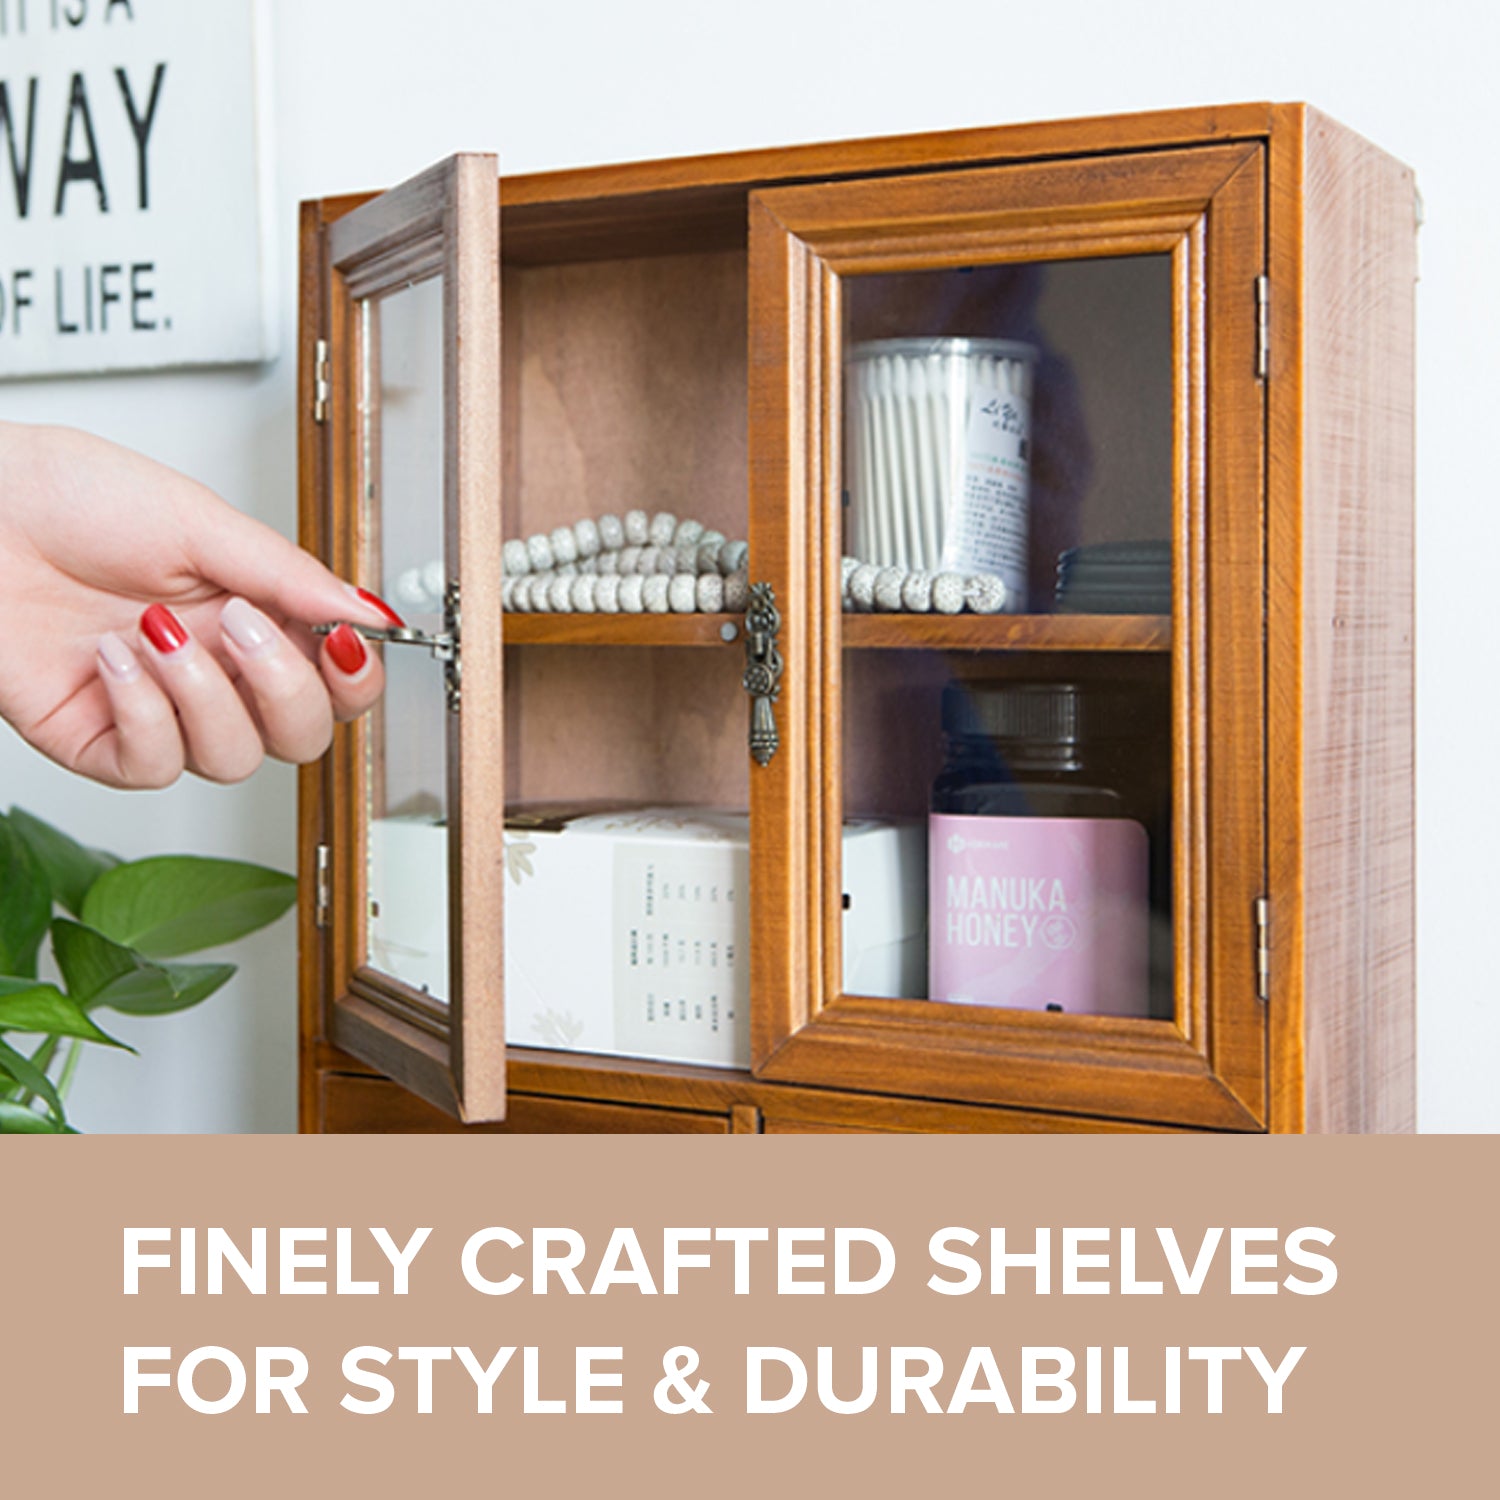 Load image into Gallery viewer, Wall Shelf Hanging Cupboard and Pantry Storage | Glass Display Wood Drawered Cabinets